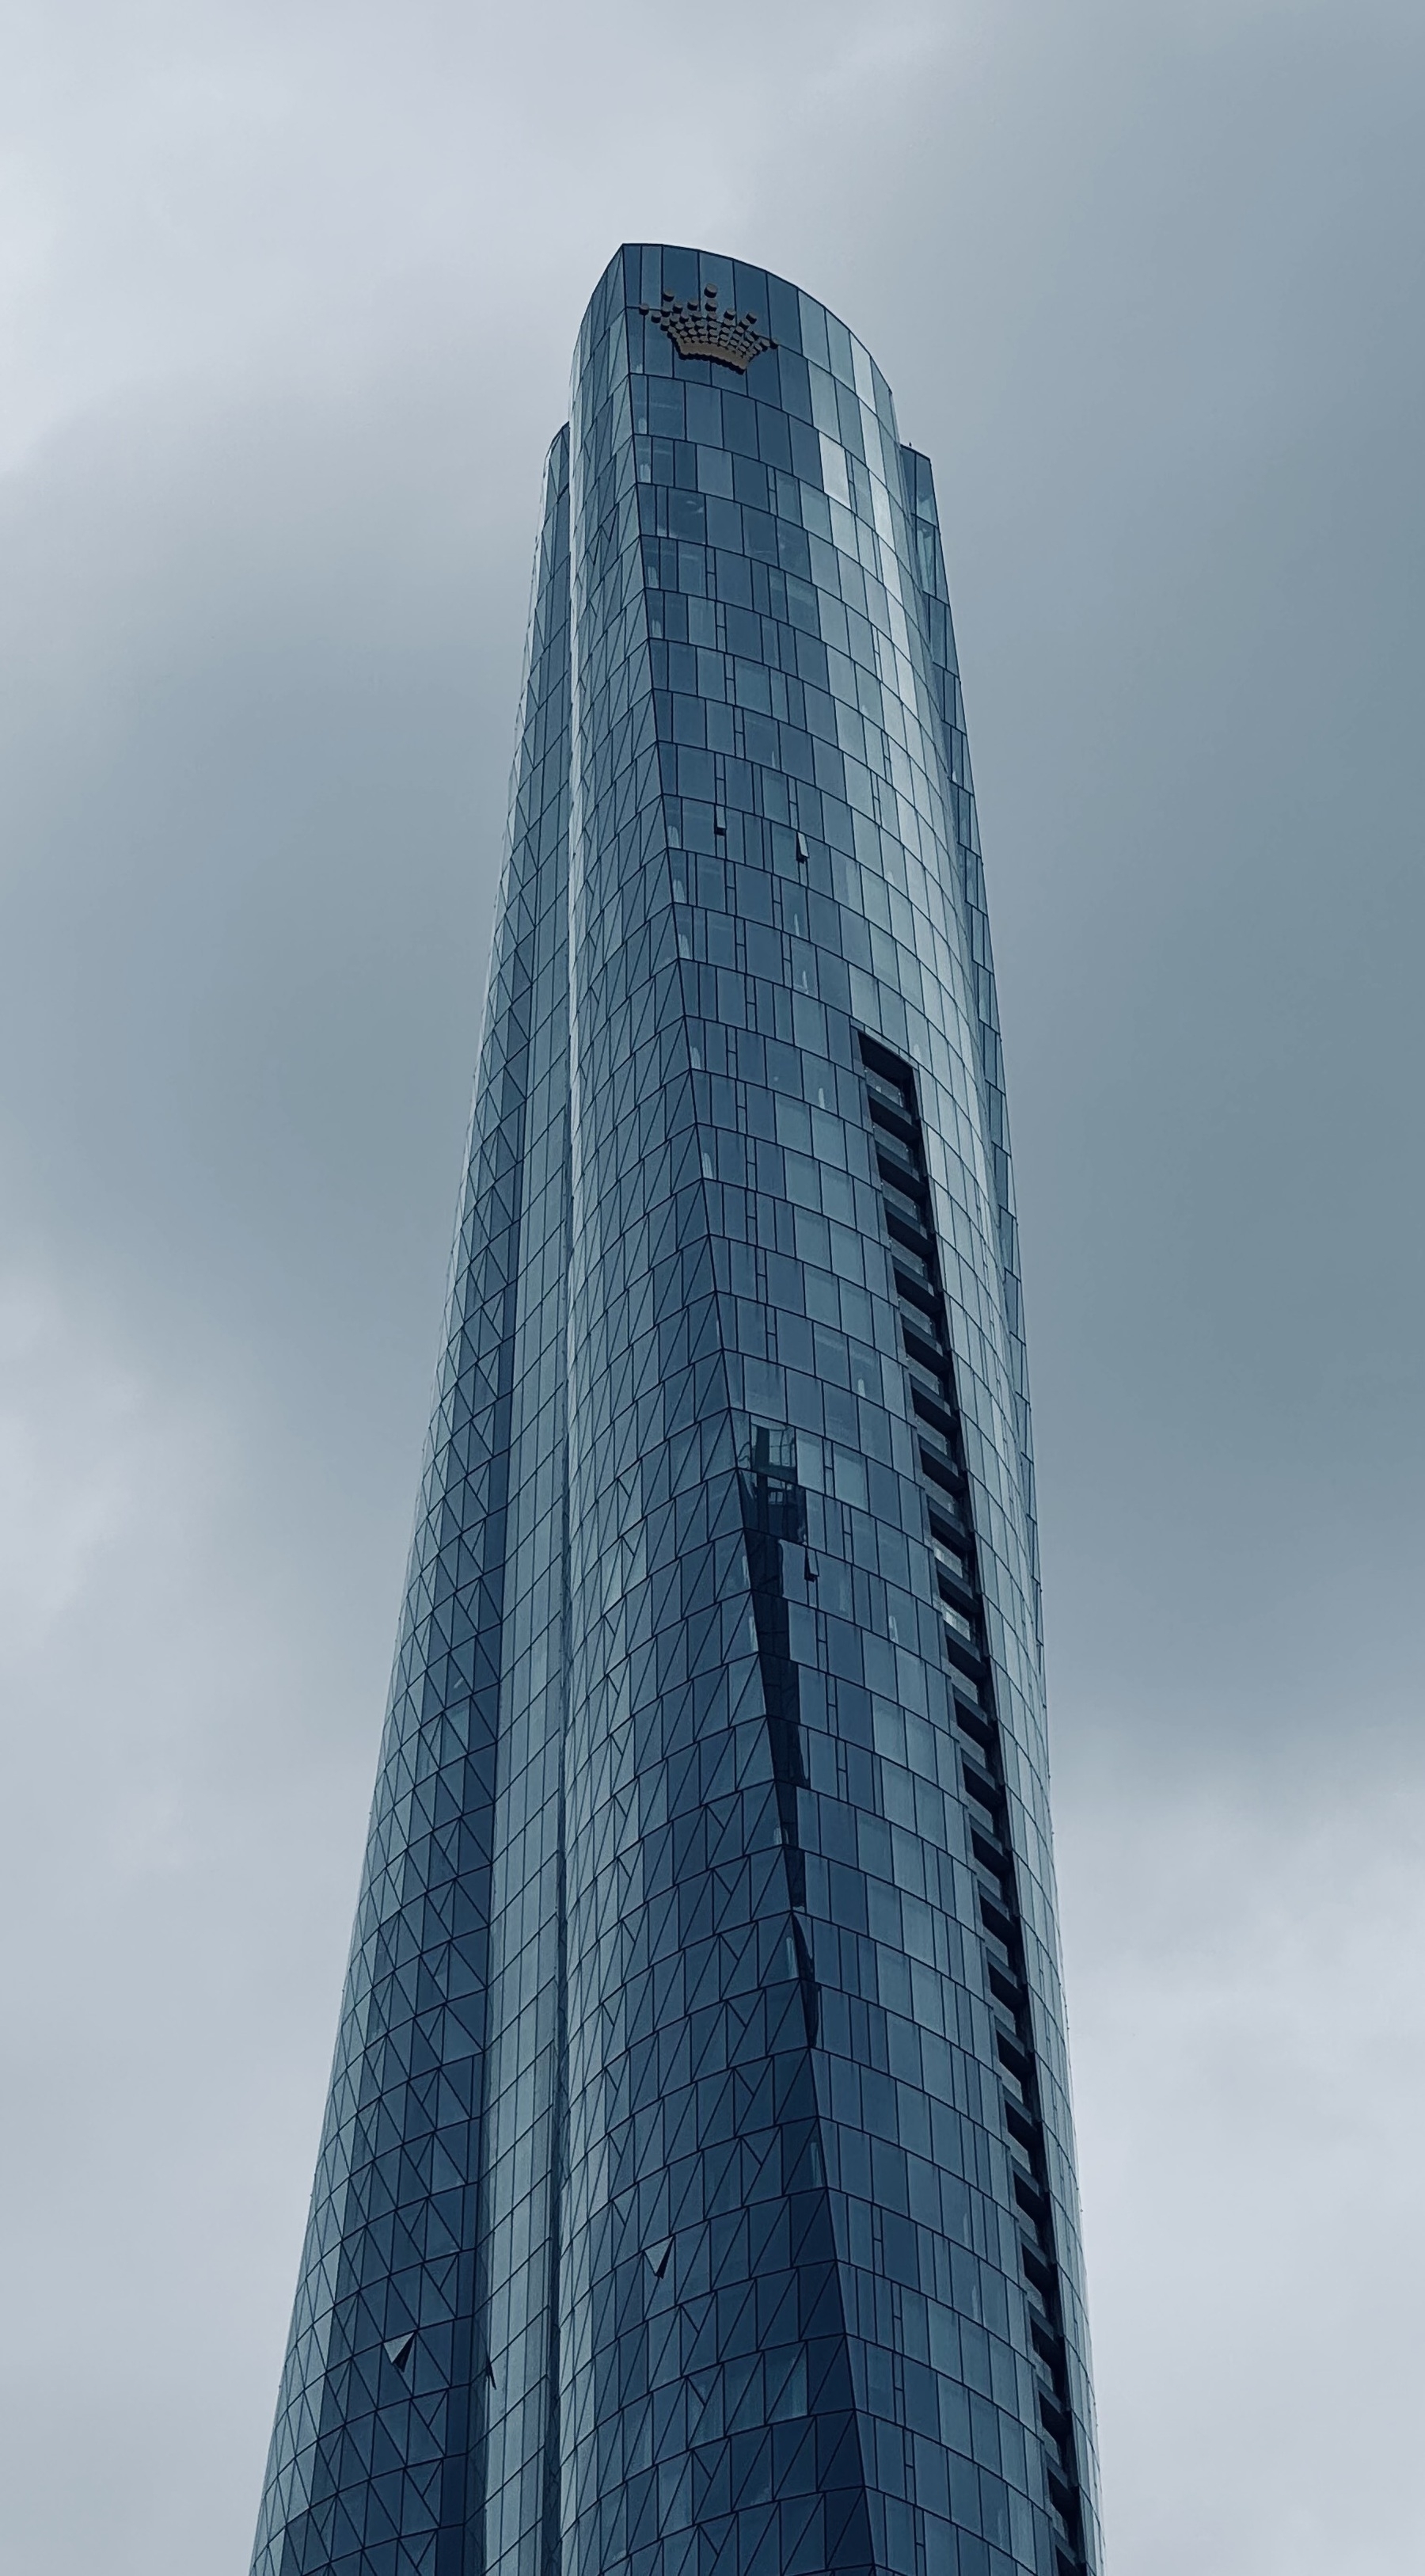 A glass skyscraper with a twisted design against a cloudy sky.